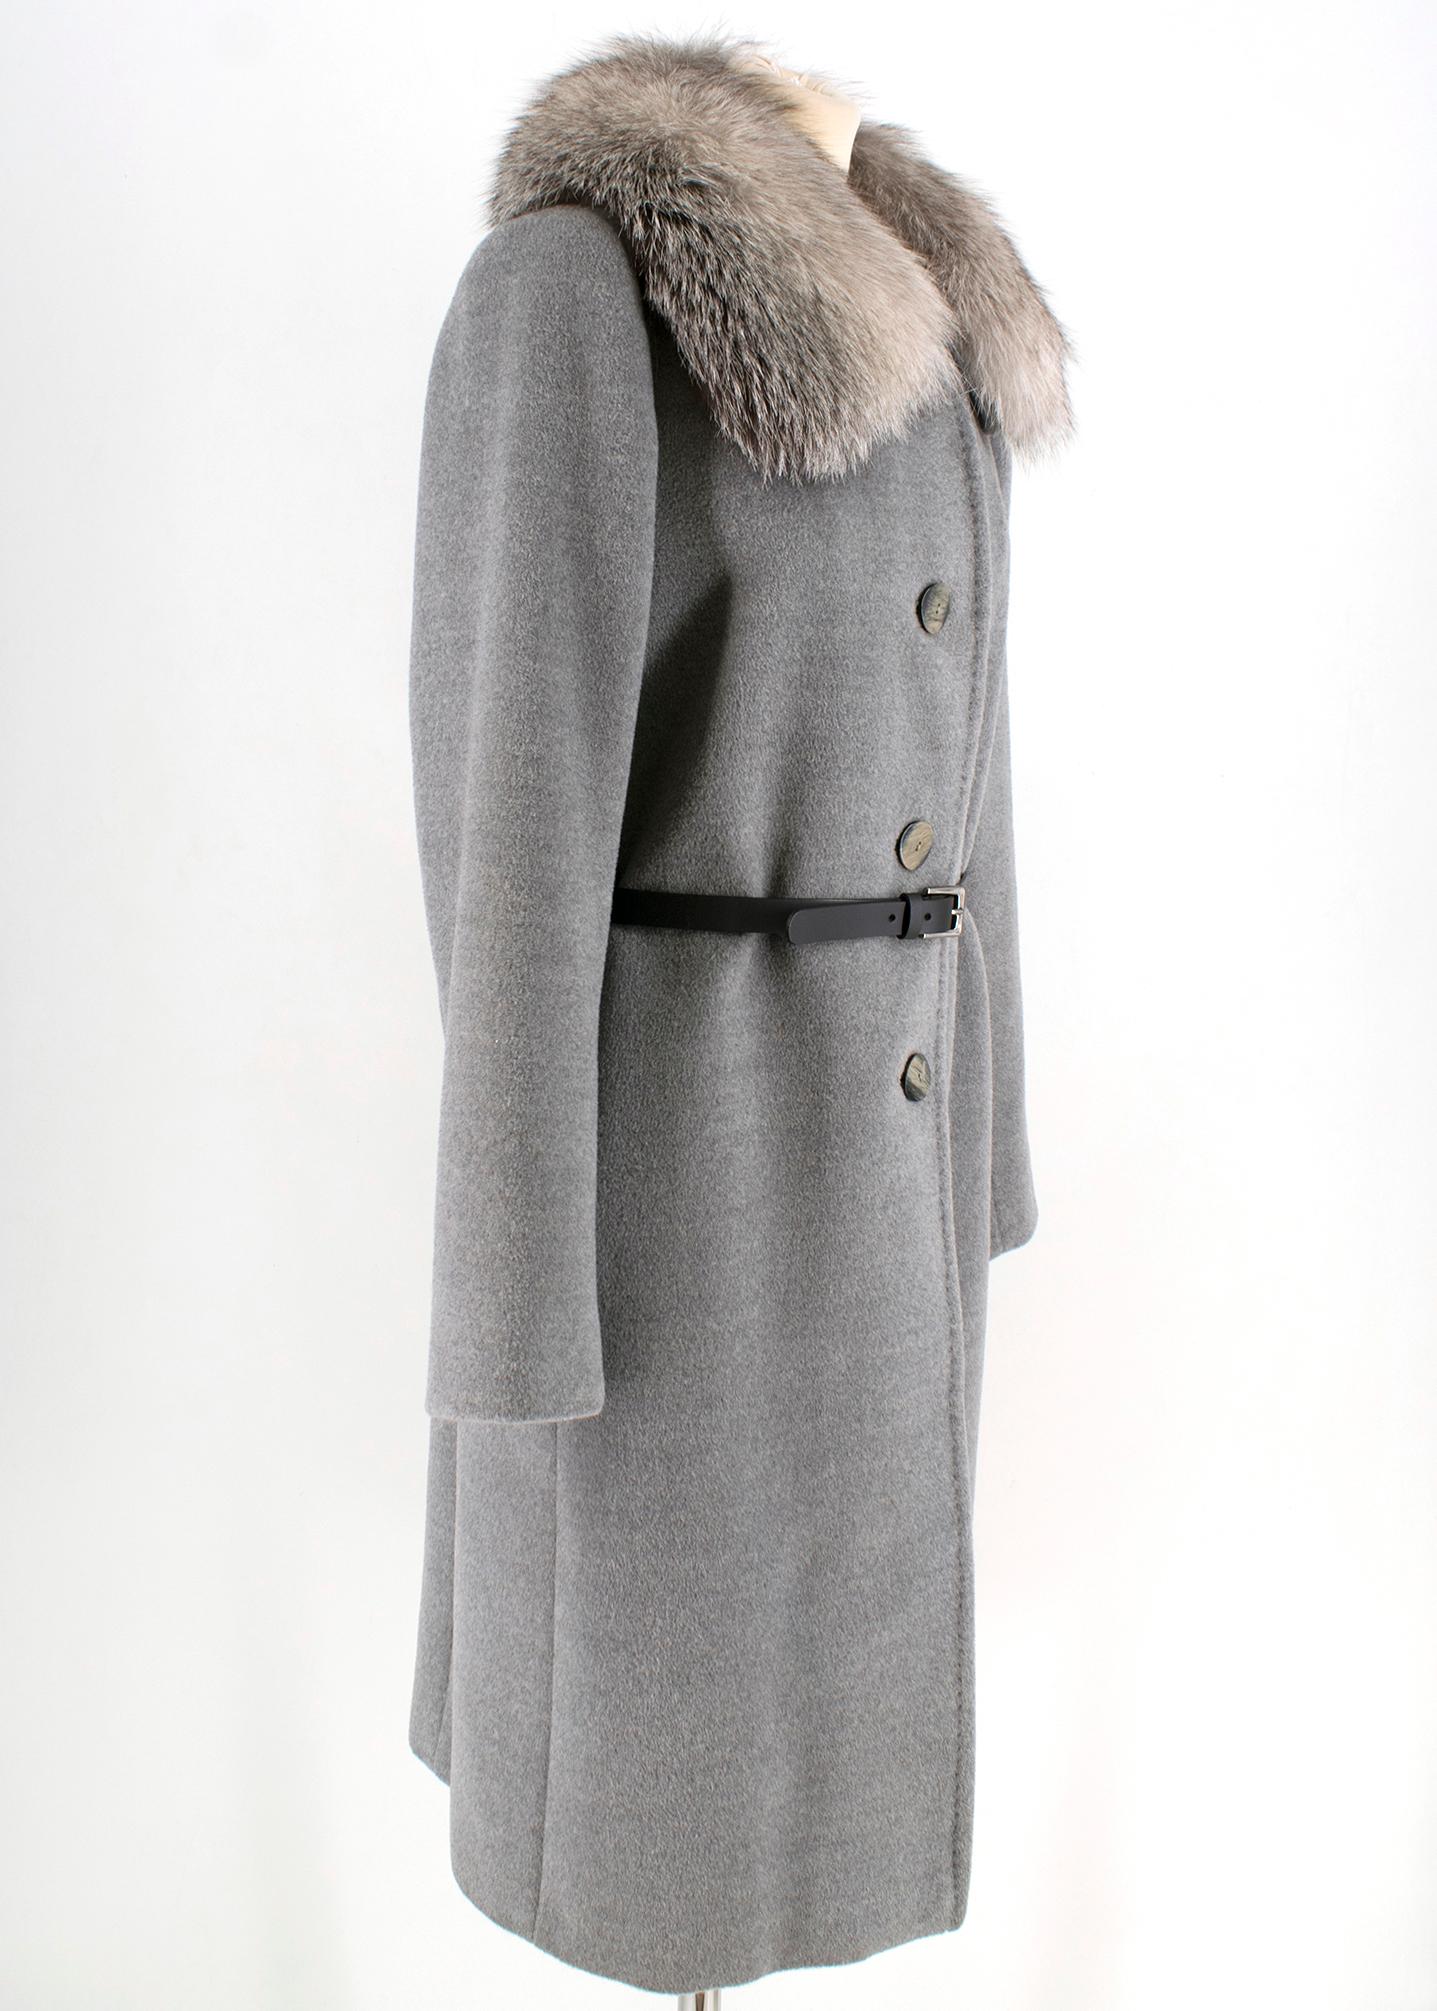 Marella Detachable Fox Fur Collar Grey Wool Coat.

- Virgin wool and detachable fox fur Long grey coat.
- Straight cut with step lapels.
- Featuring long sleeves and dropped shoulders.
- Visible resin-button fastening with duel welt pockets and silk